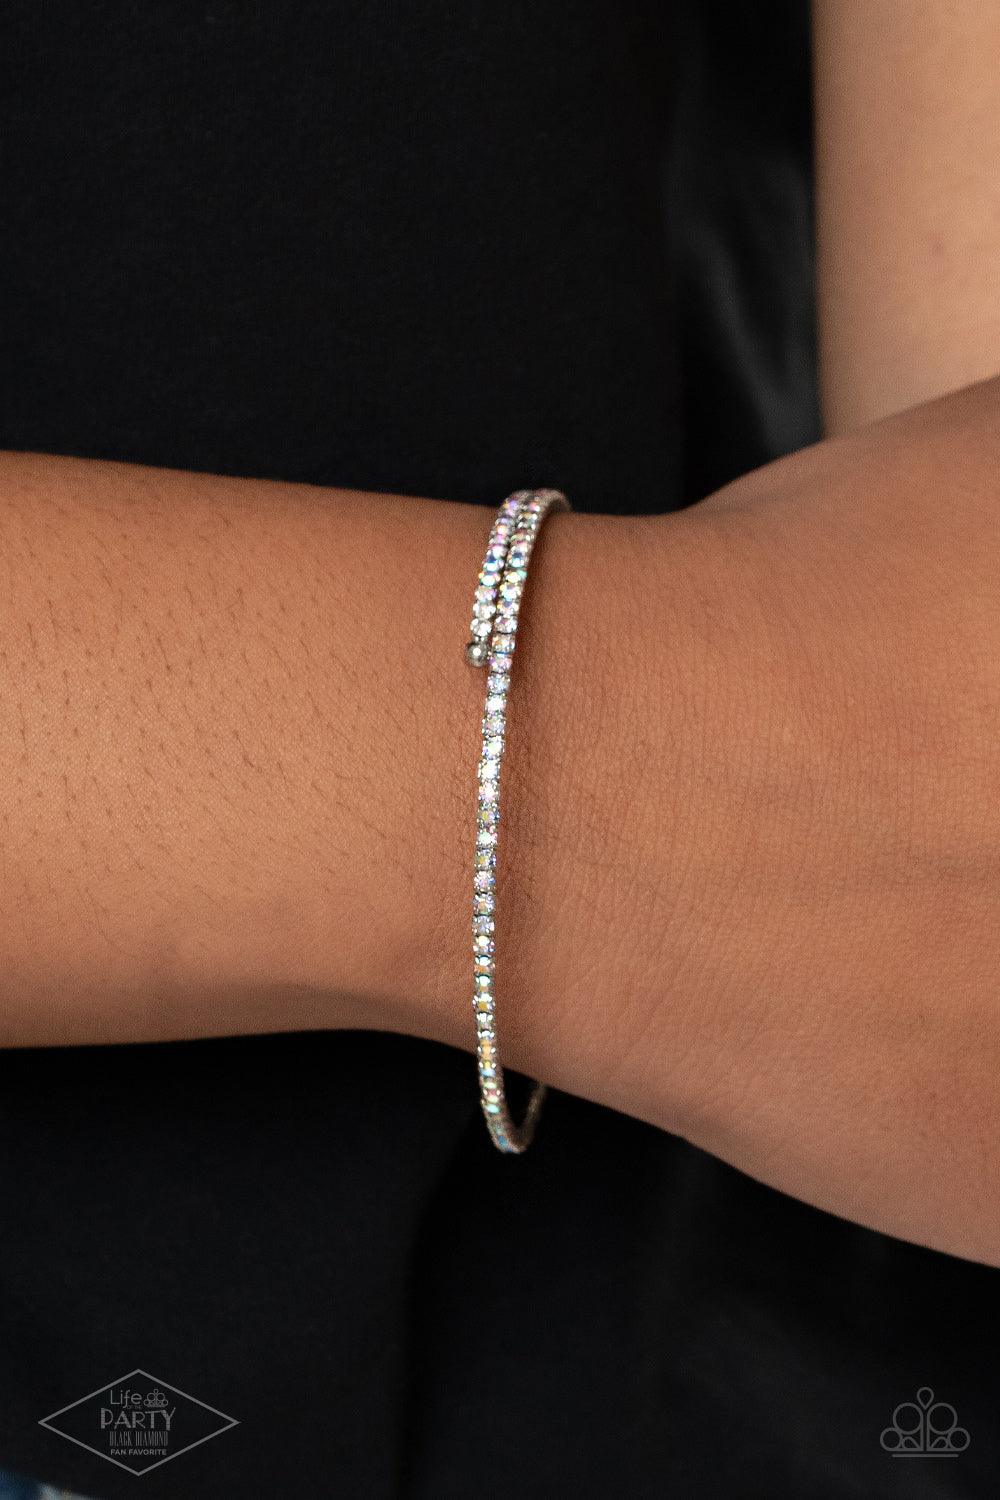 Paparazzi Accessories Sleek Sparkle - Multi Dotted in dainty iridescent rhinestones, a flexible wire coils around the wrist for a refined flair. Sold as one individual bracelet. Jewelry